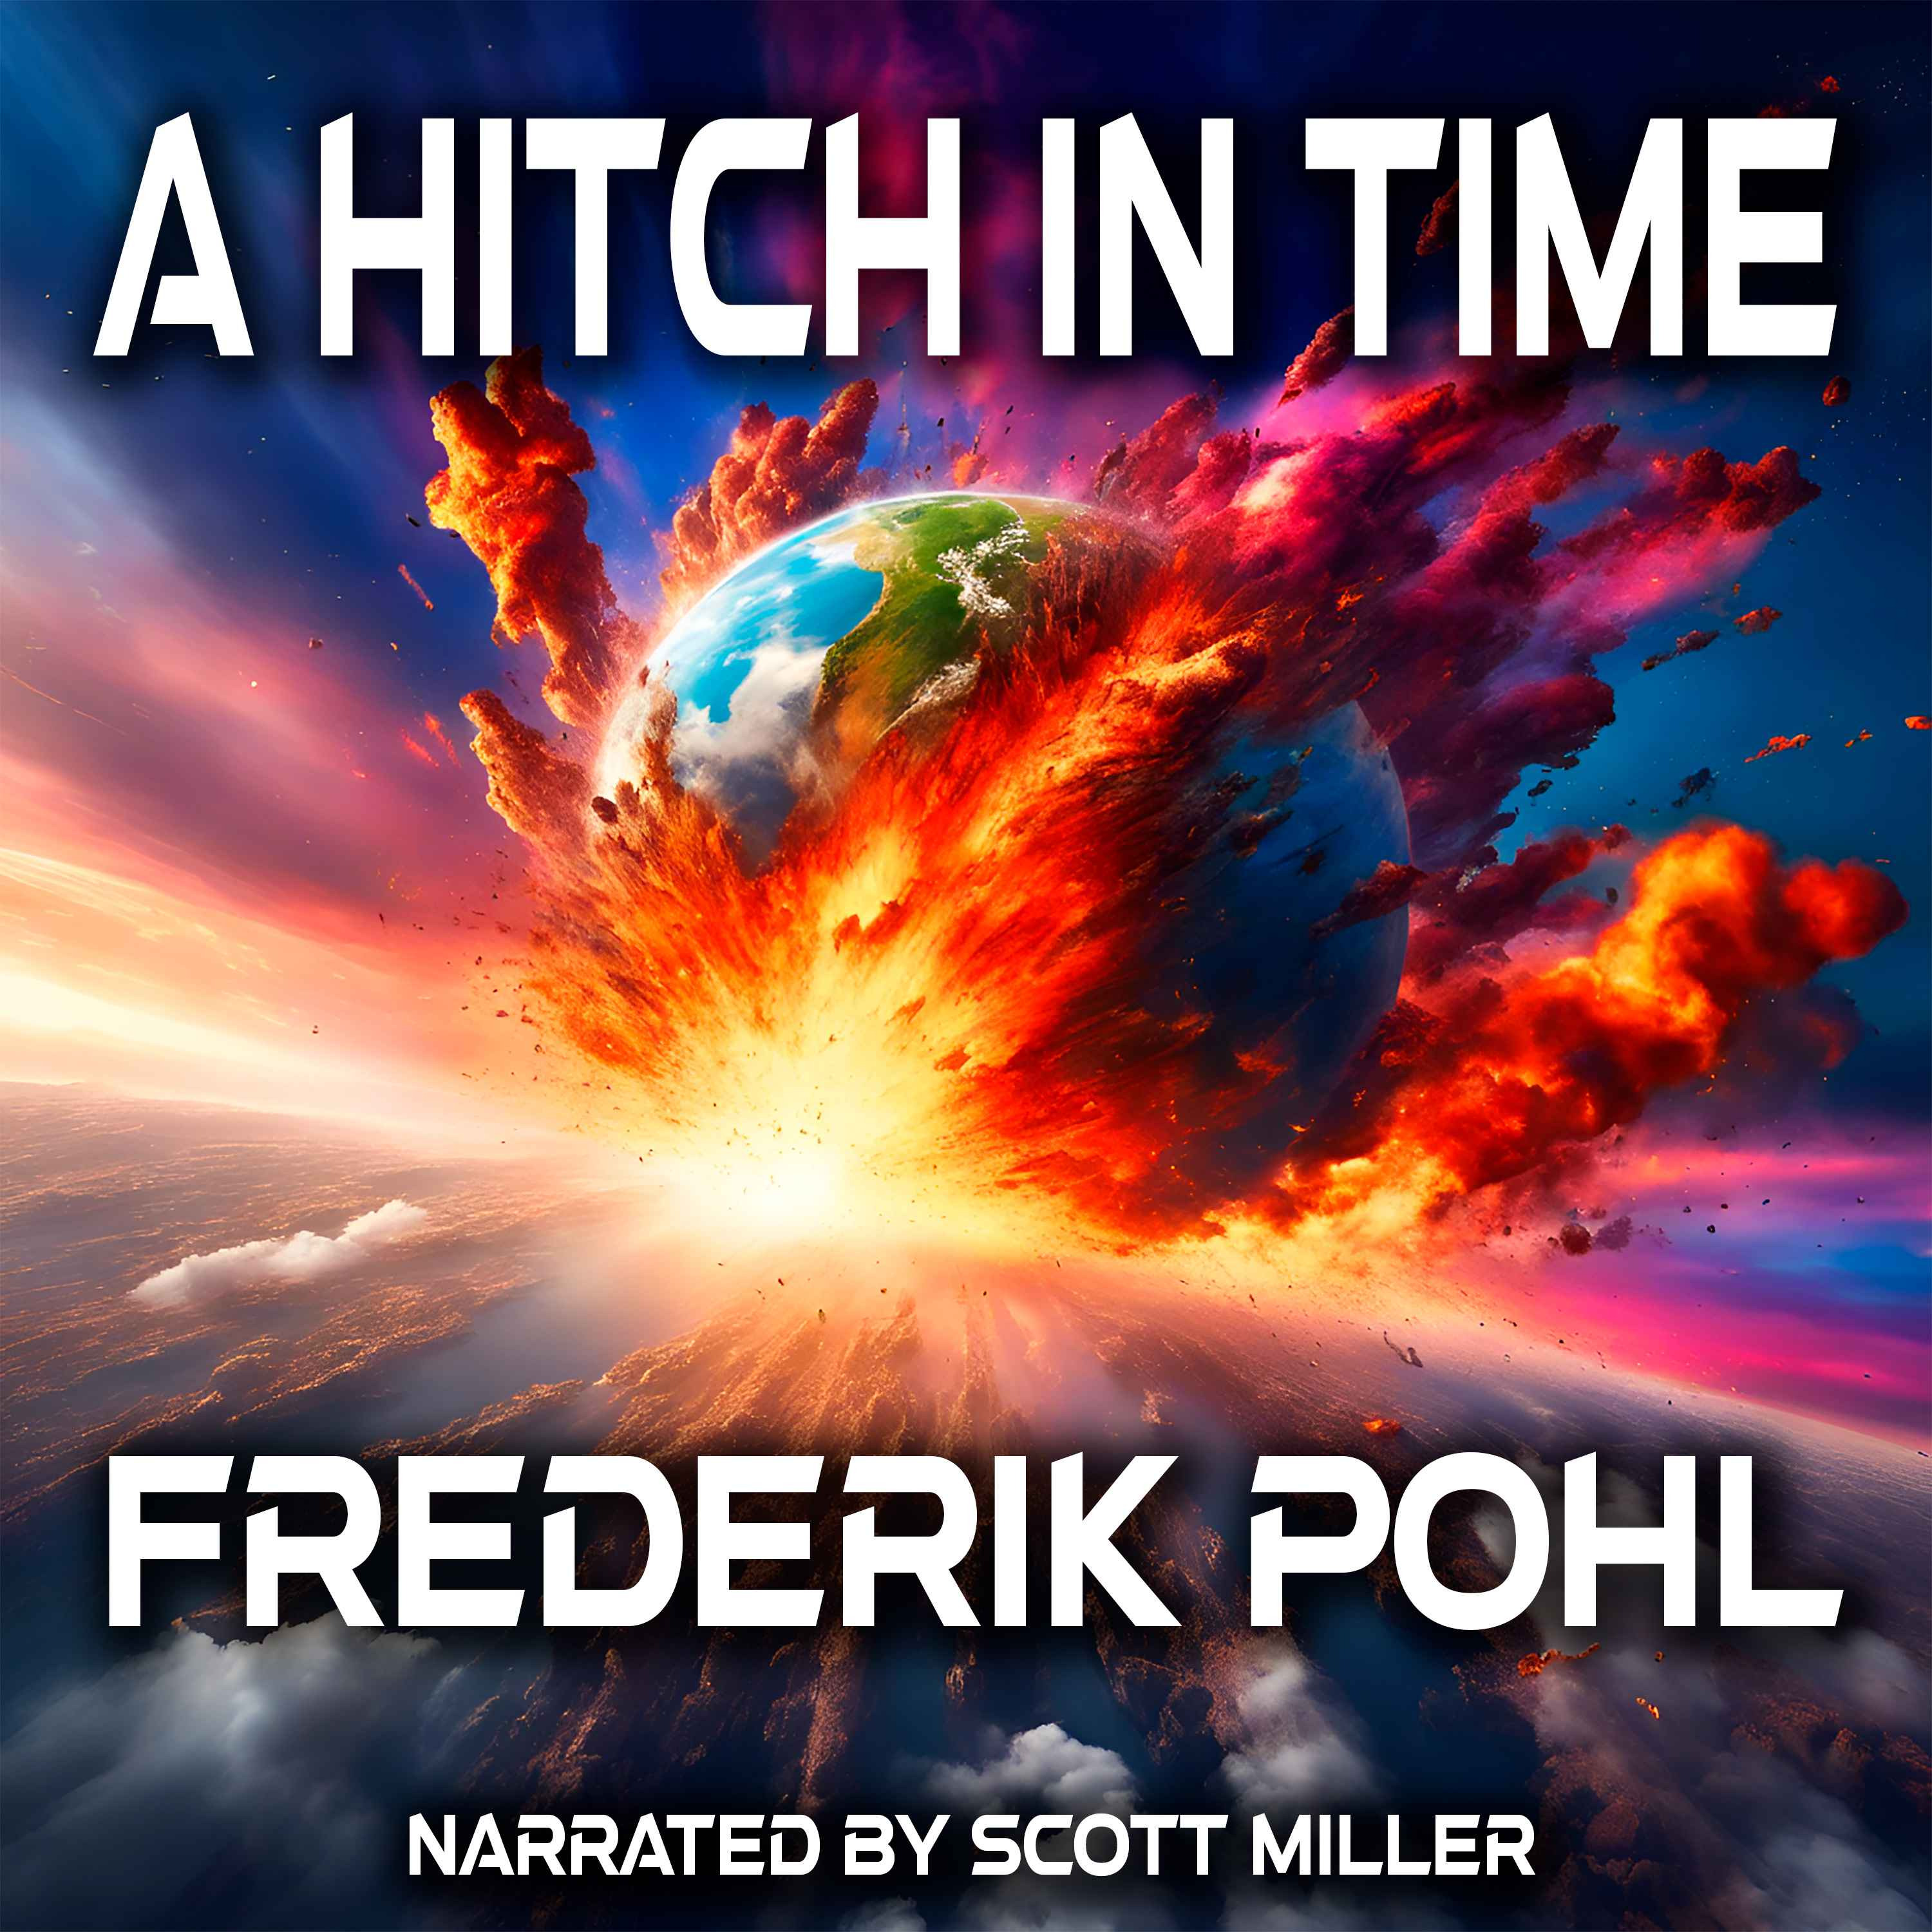 A Hitch in Time by Frederik Pohl - Short Sci Fi Story From the 1940s